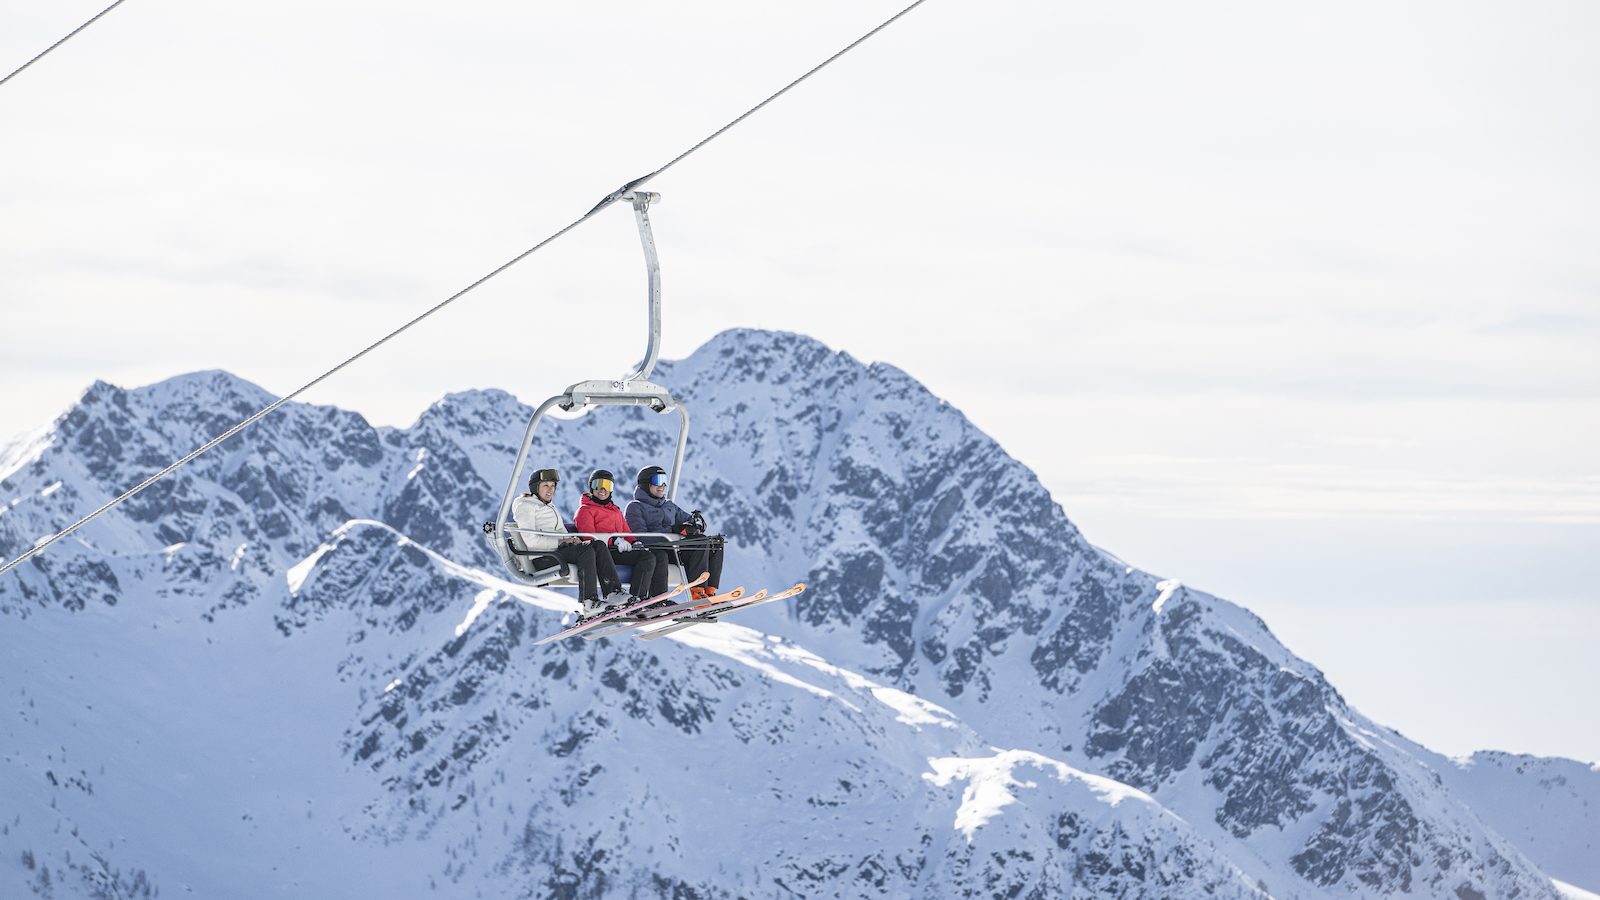 Skiers on chairlift at Dolomiti Superski